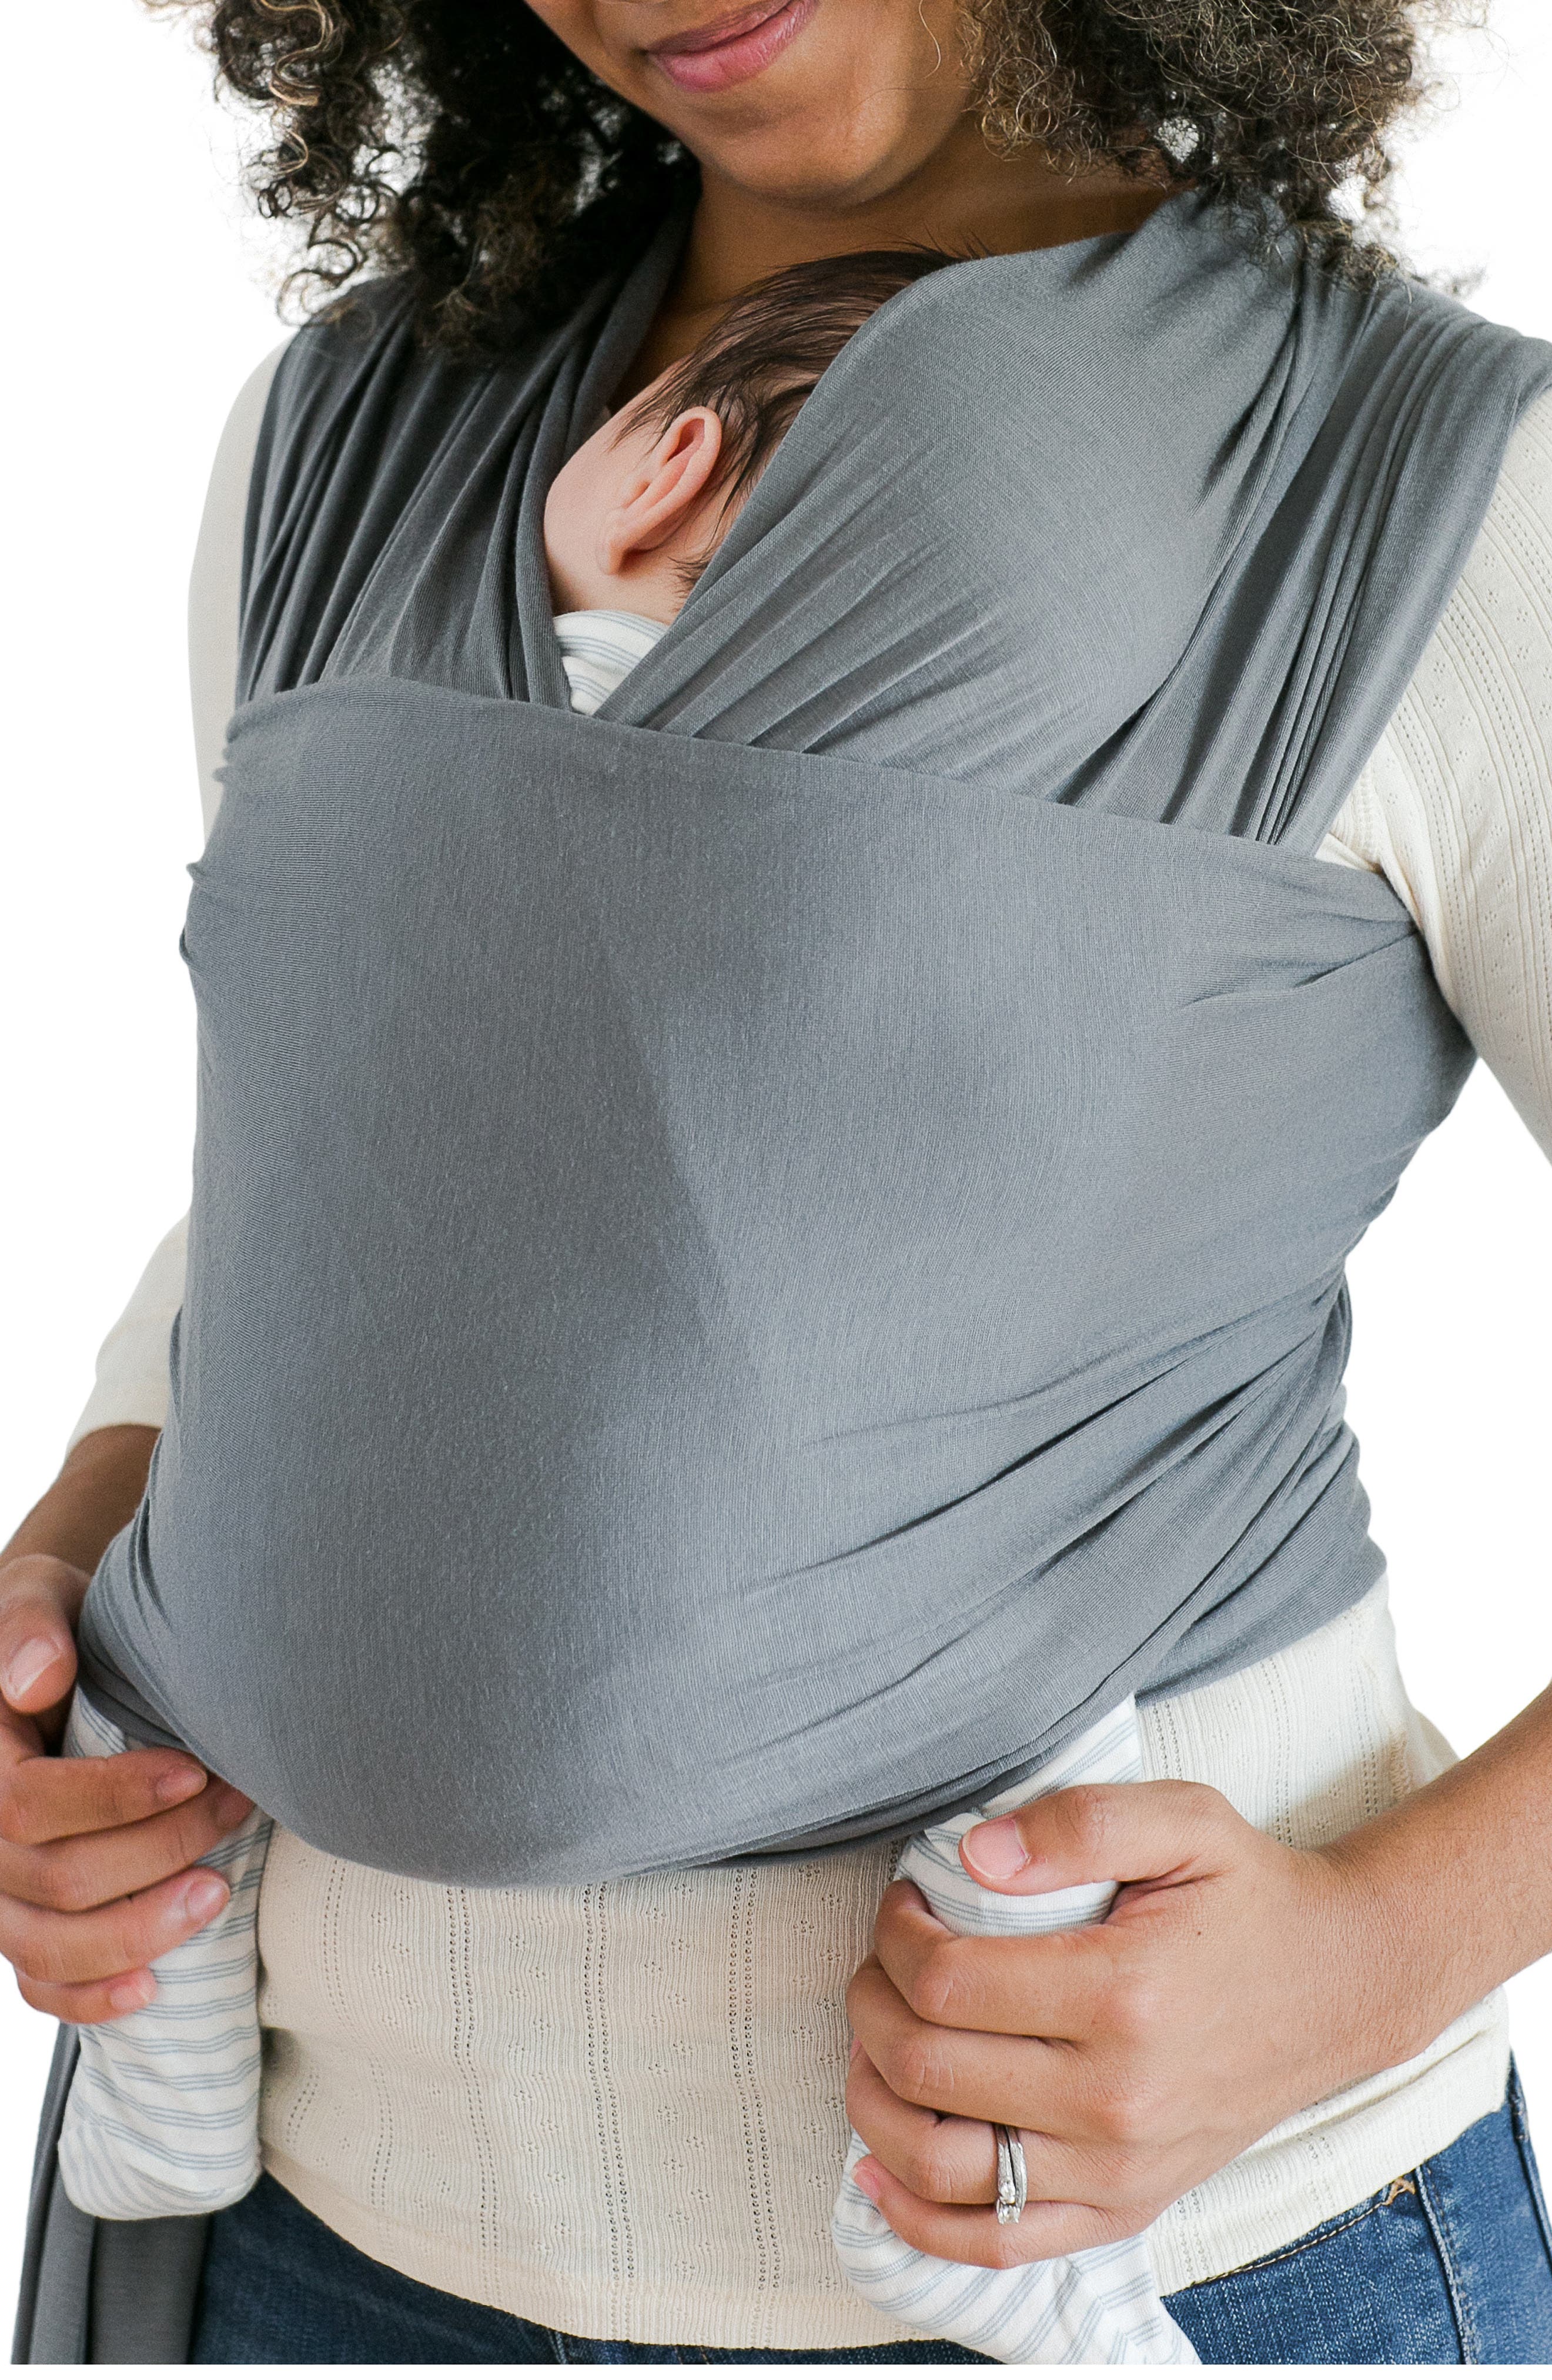 solly baby wrap sling